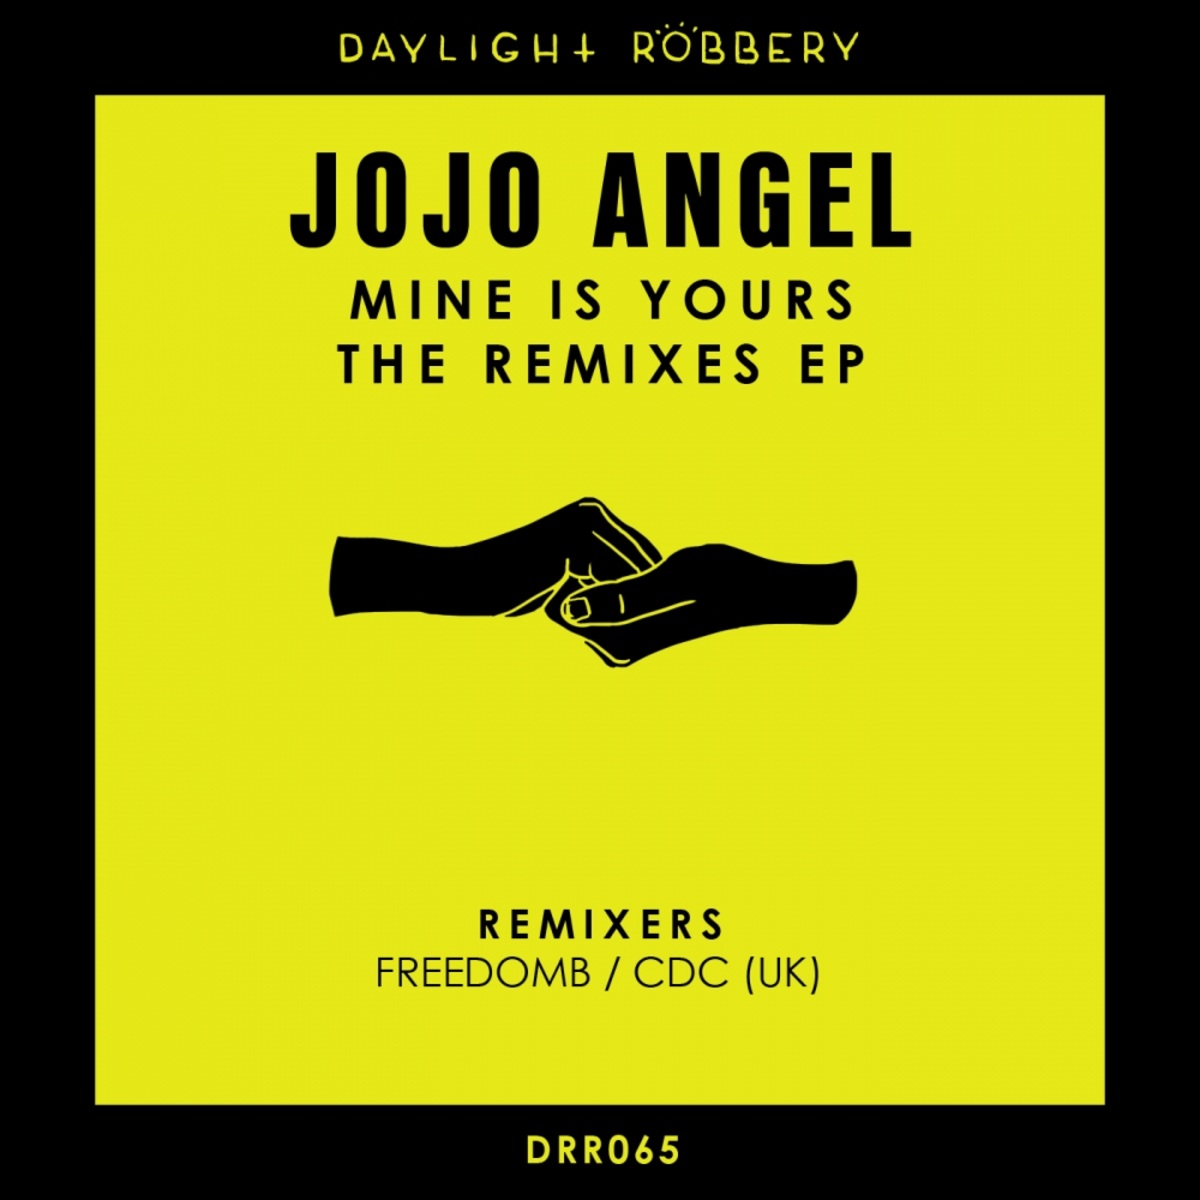 Jojo Angel - Mine Is Yours The Remixes EP / Daylight Robbery Records